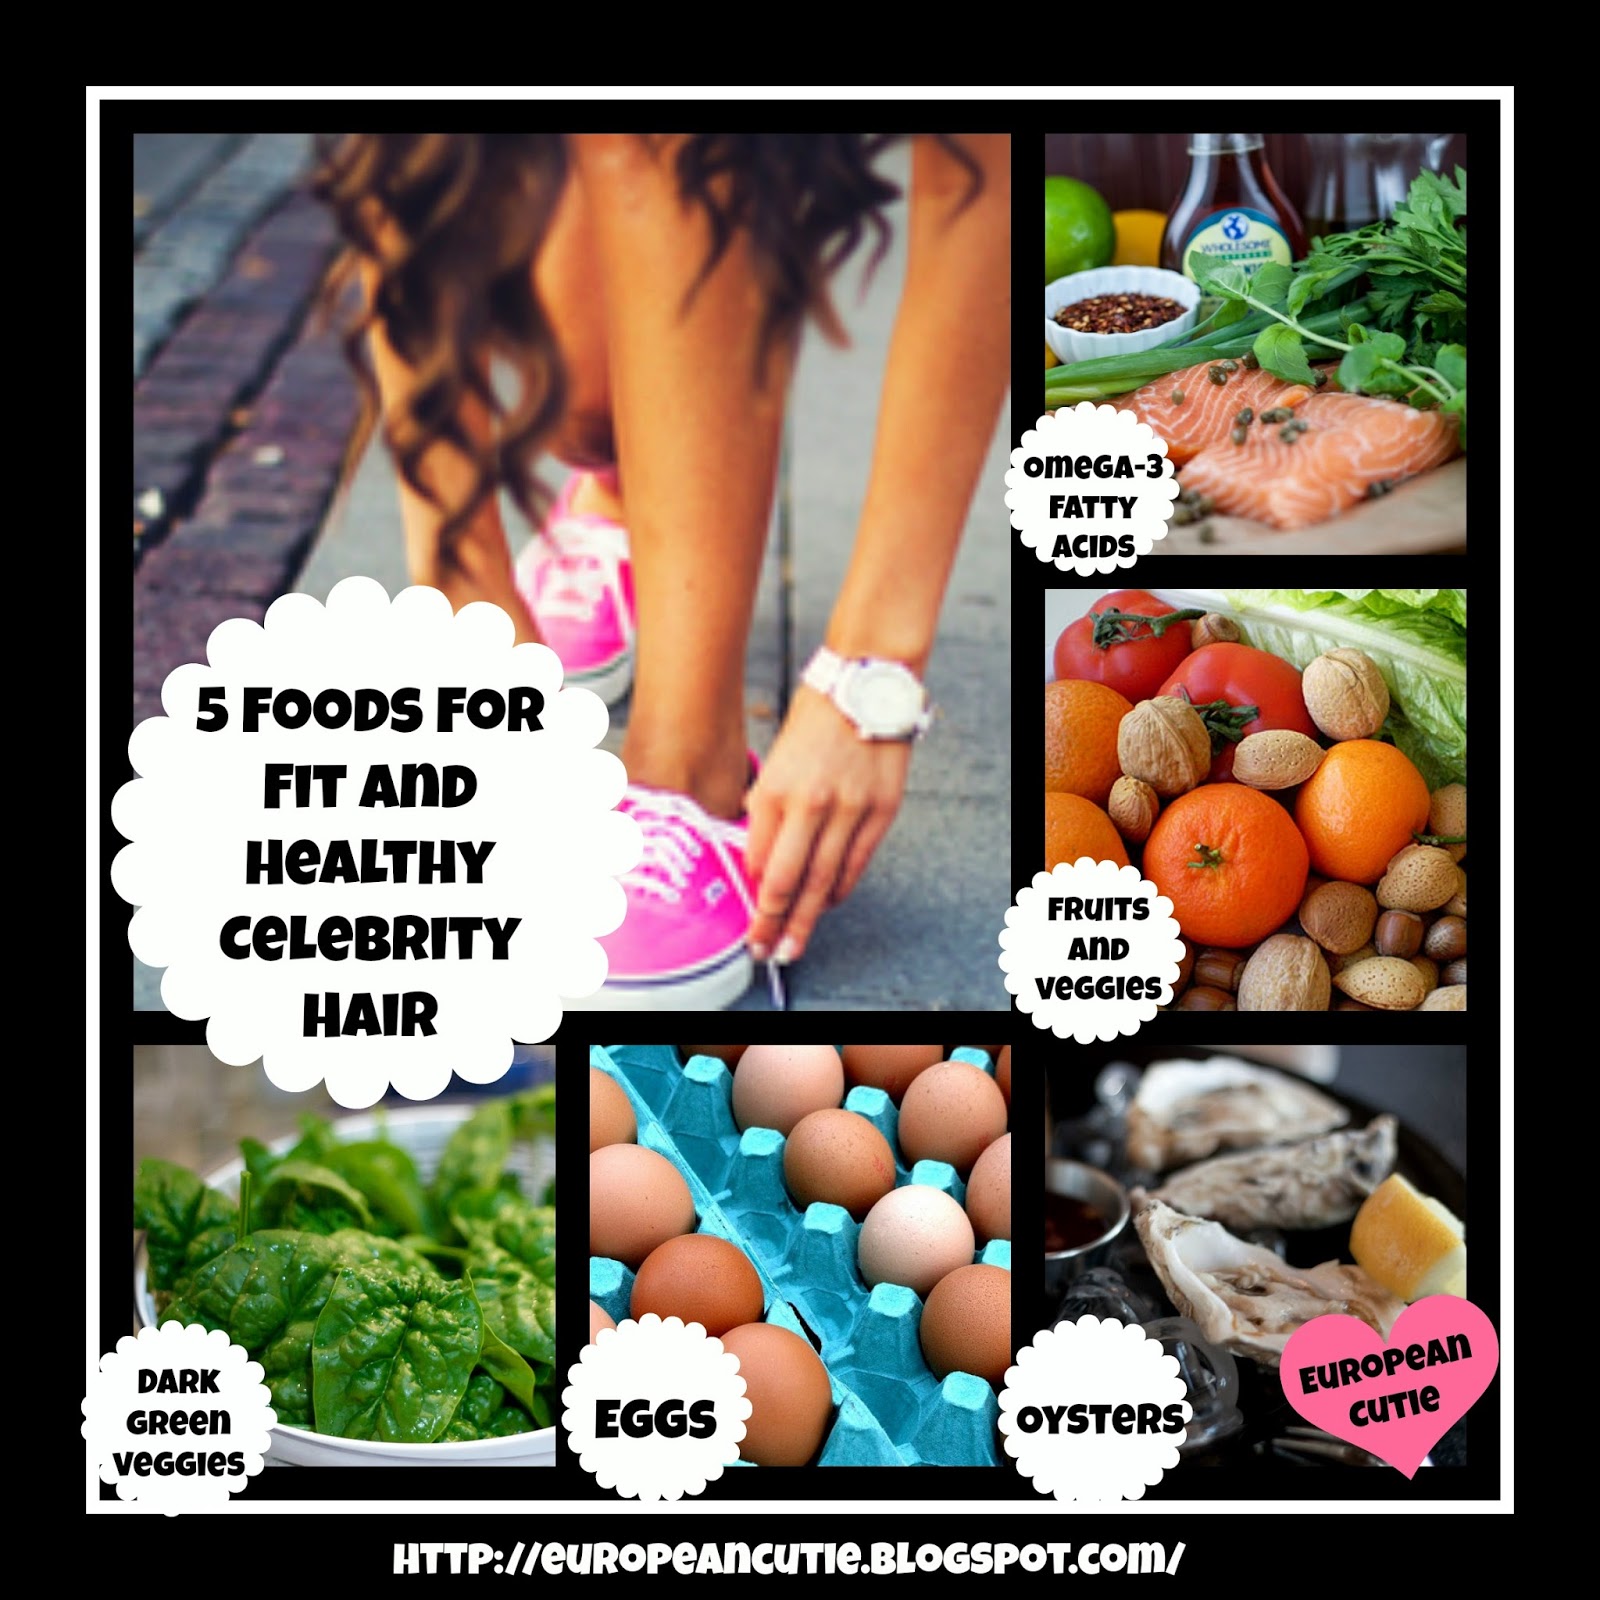 European Cutie ♥: 5 Foods For Fit and Healthy Celebrity Hair ♥